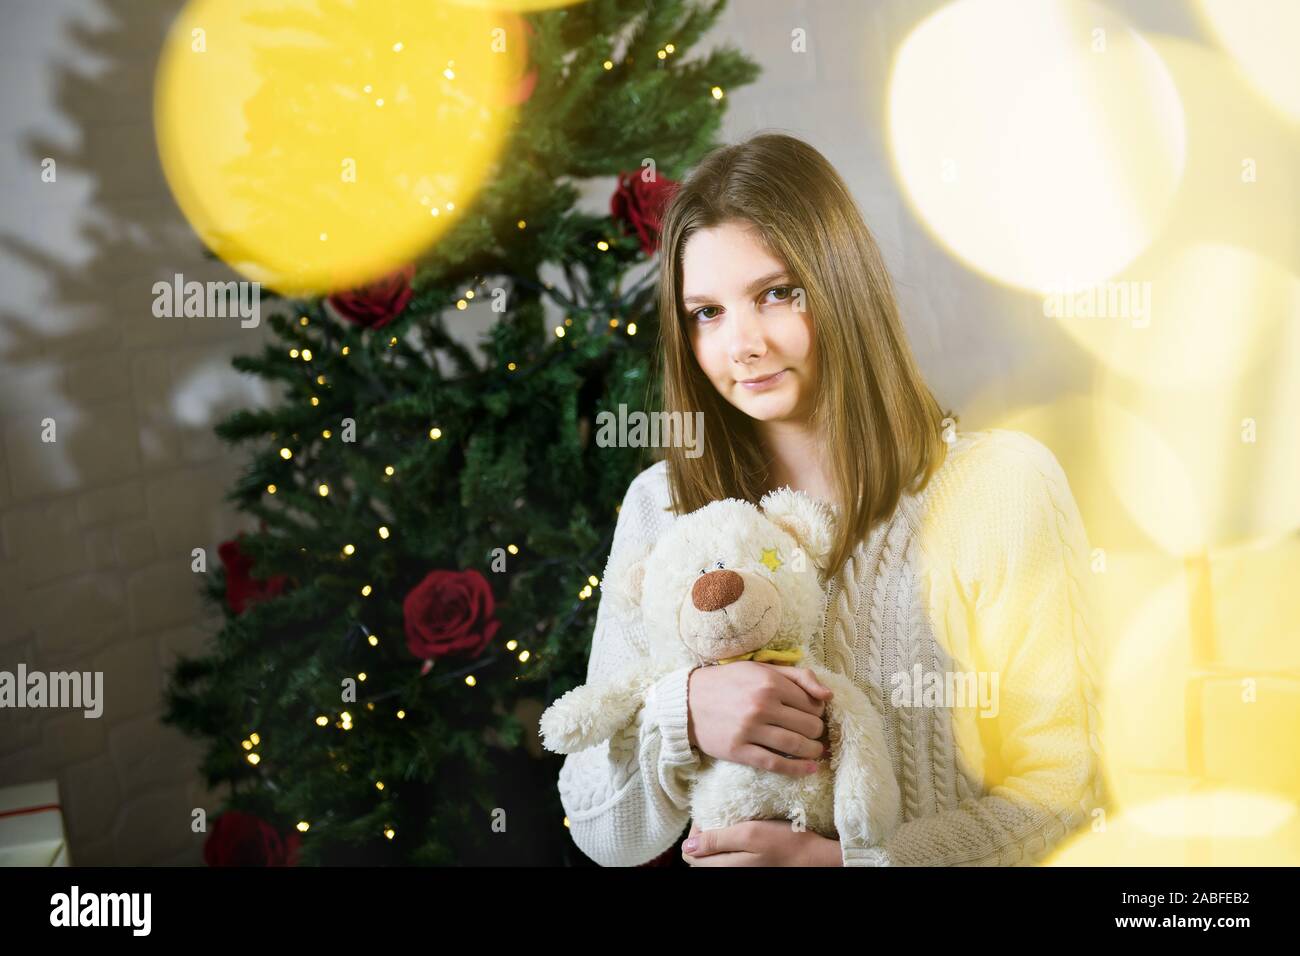 girl sits near a Christmas tree and holds in her hands a toy teddy bear Stock Photo